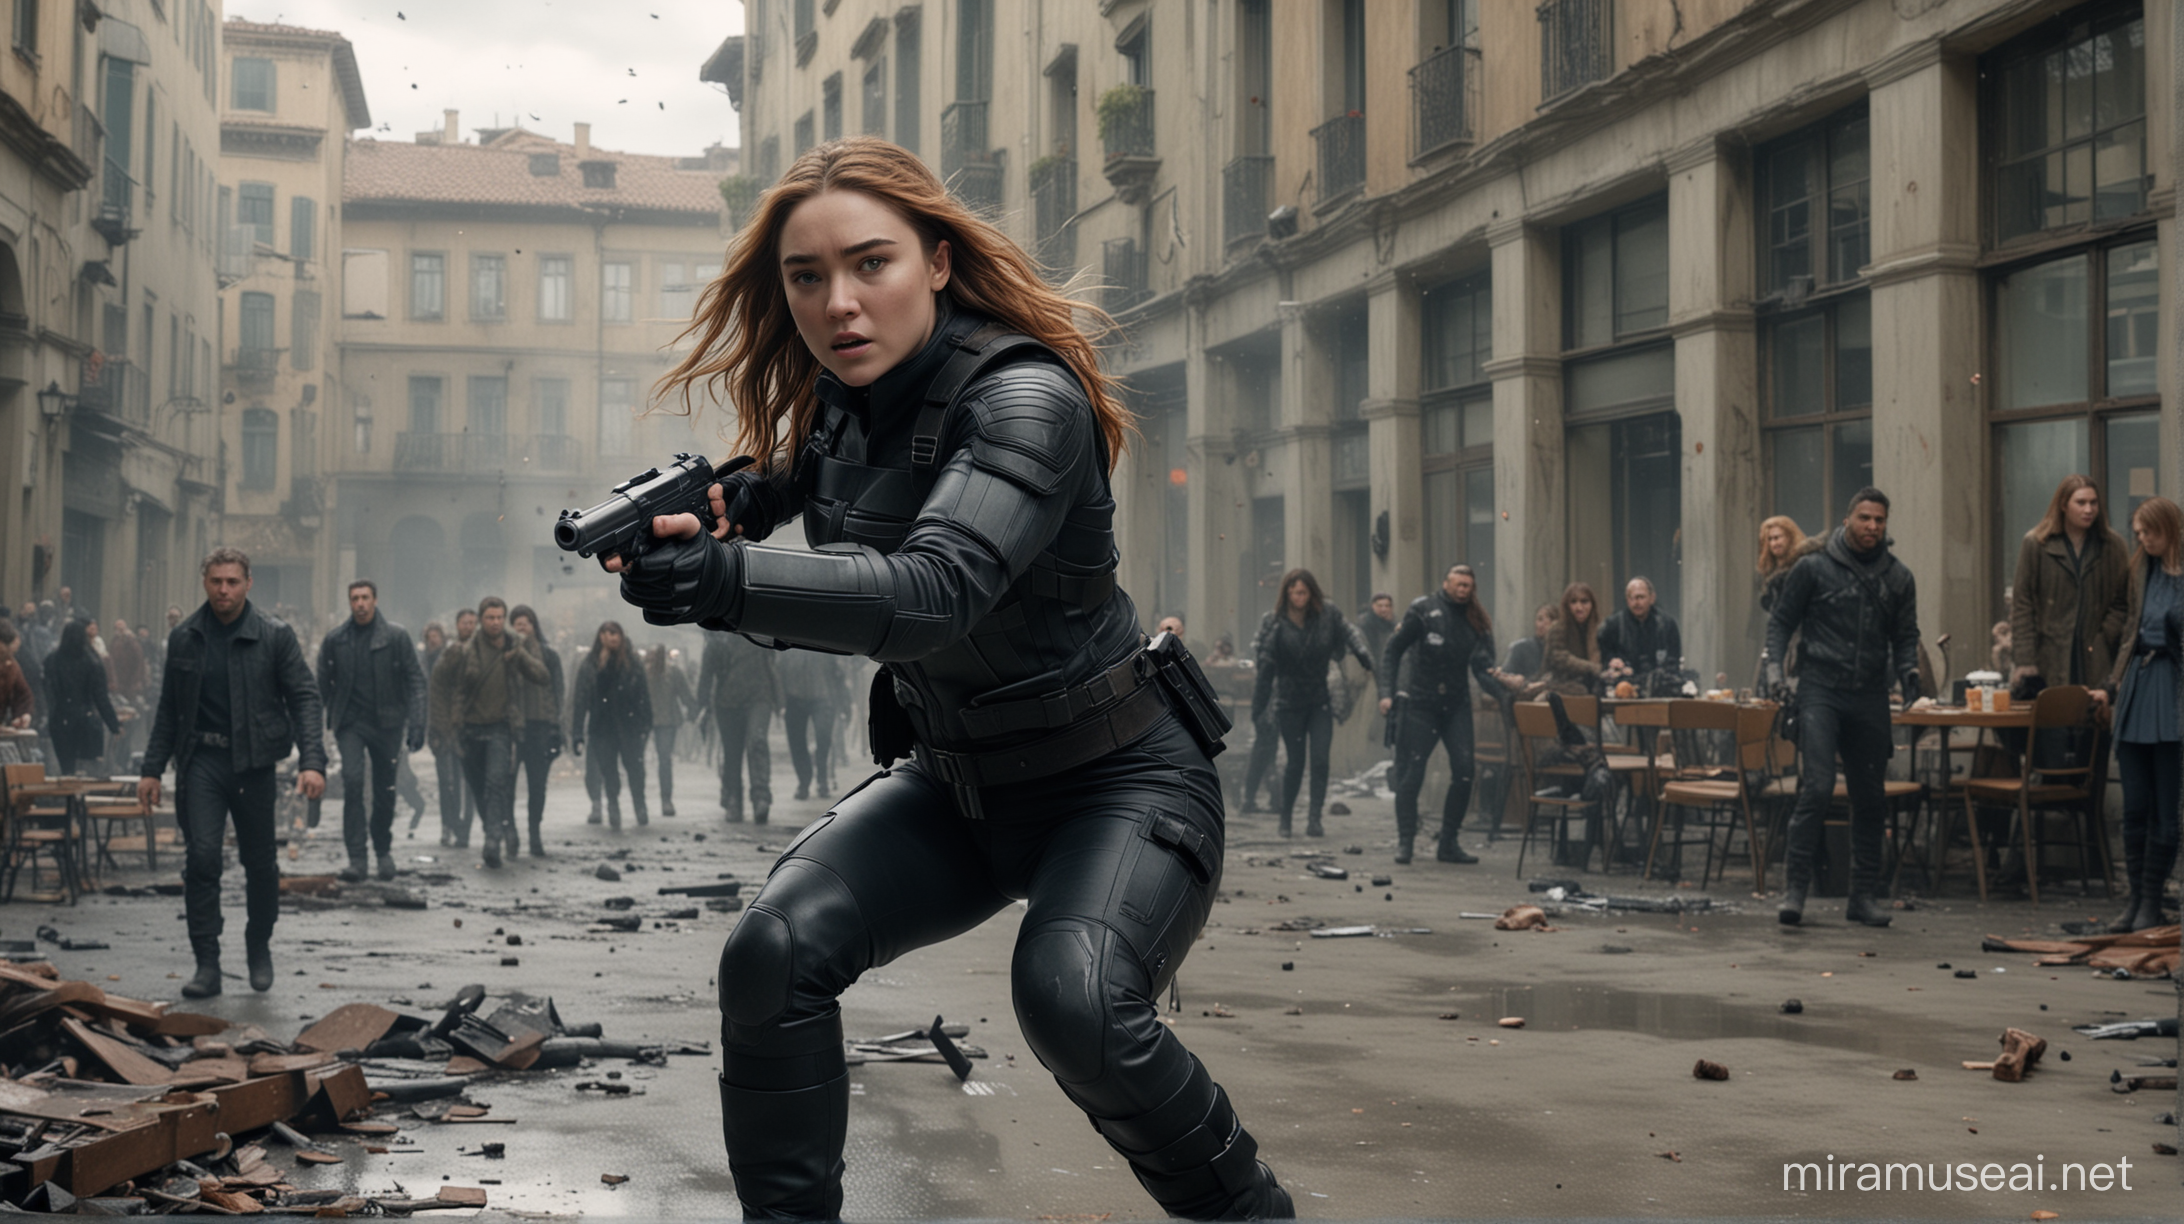 Photographic, extremely high quality high detail RAW photo, Florence Pugh, as The Winter Soldier, aiming a pistol, sprinting through a cafeteria, debris flying, panicked civilians, dynamic action, powerful muscular anatomy detail, cinematic destruction, perspective from street level looking up, 8K resolution, by Hajime Isayama and Michael Bay